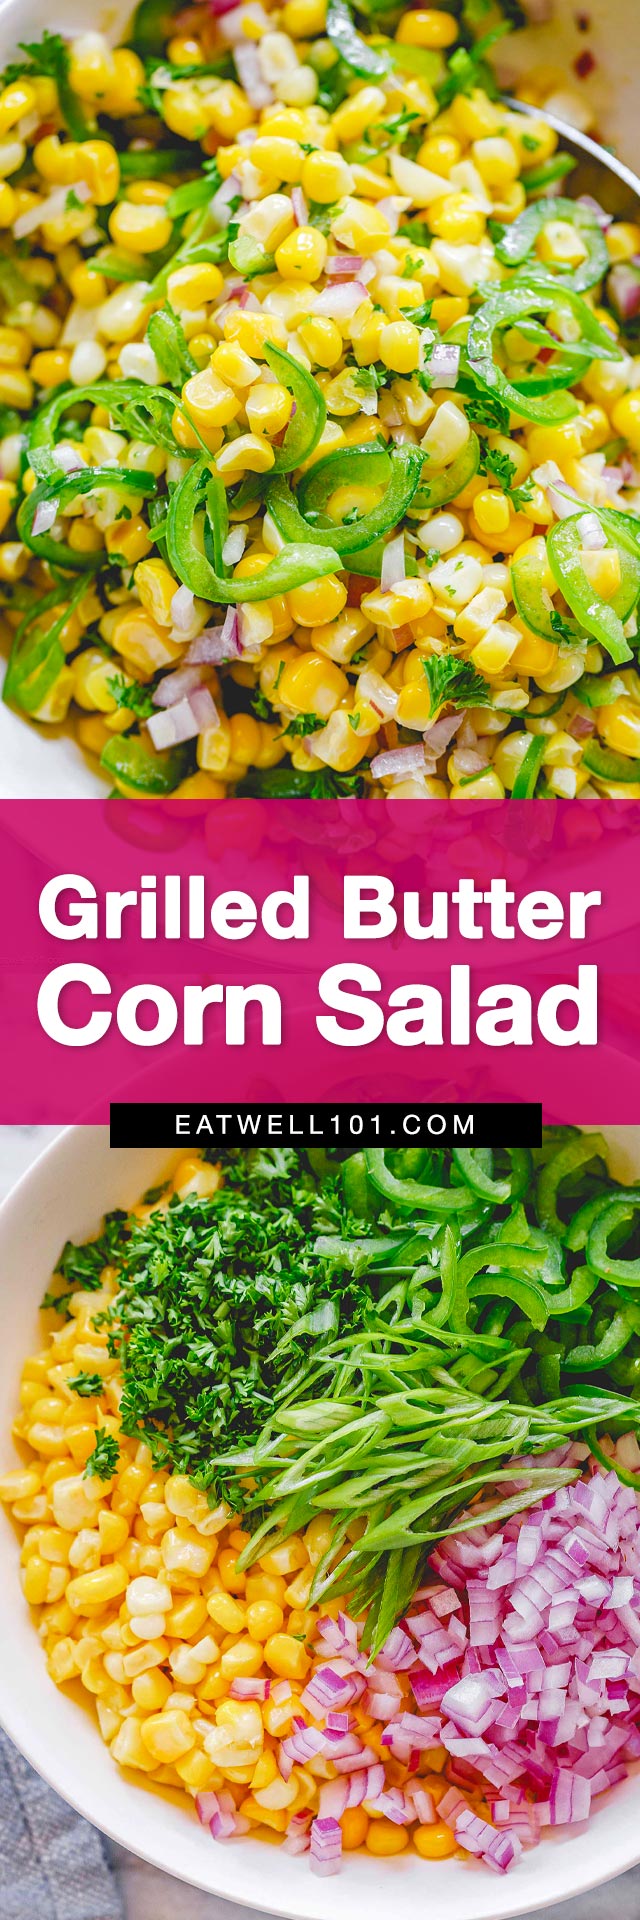 Grilled Corn Salad with Jalapeño - #corn #salad #recipe #eatwell101 - This grilled corn salad is your ultimate summer side. The blissed-out blend of grilled corn, jalapeño, and red onion goes with virtually anything!